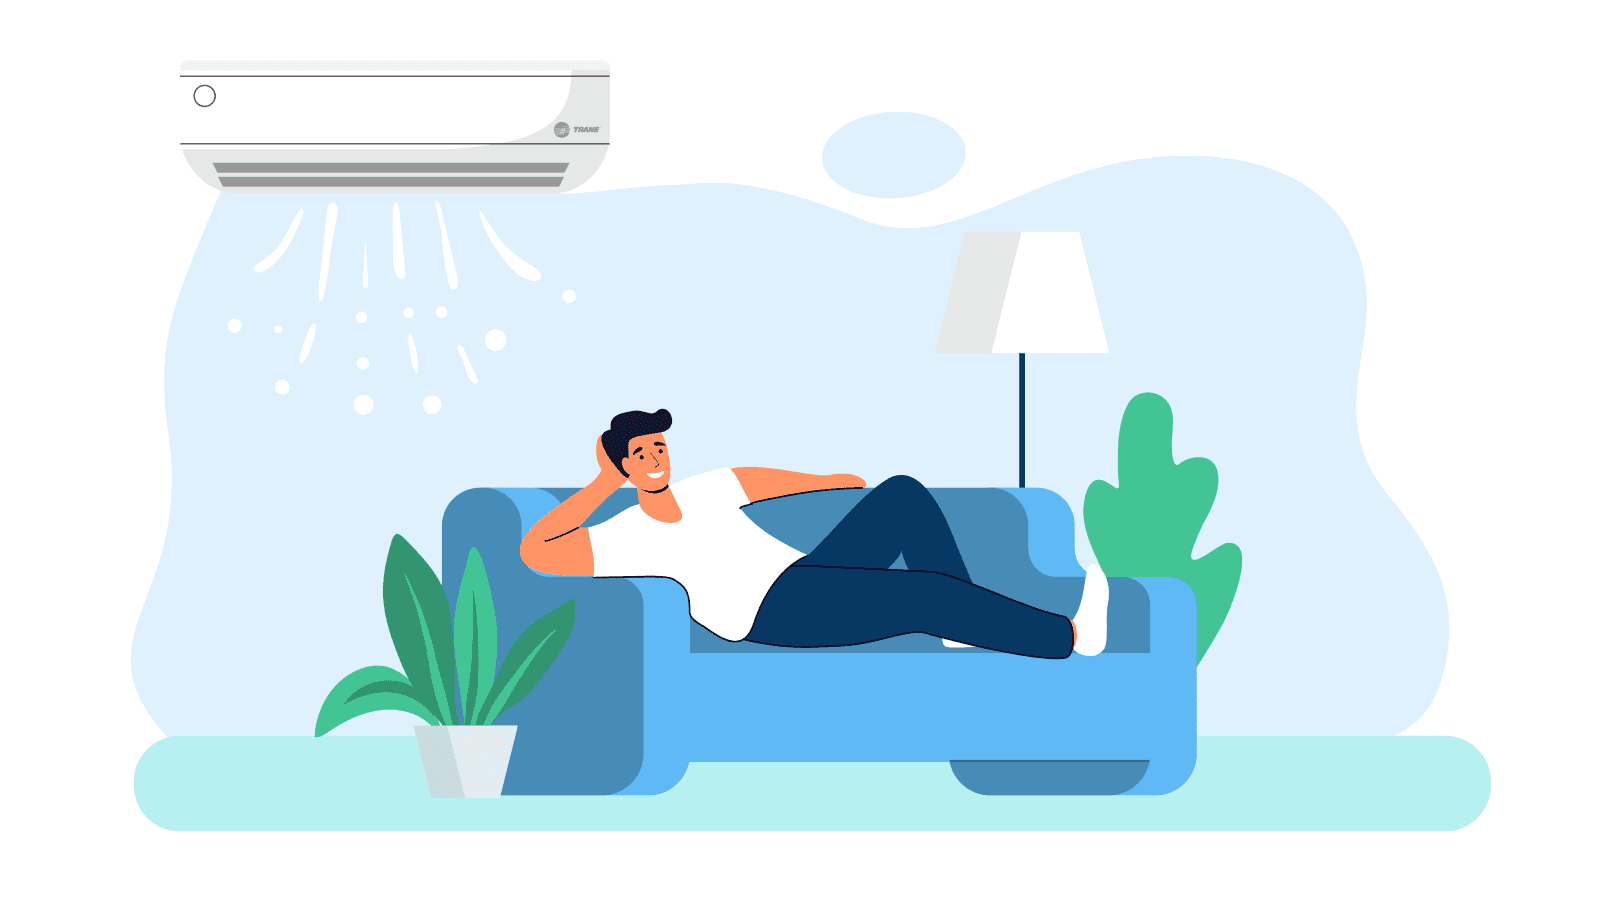 A ductless mini-split HVAC system cools a cartoon man who is lounging on a blue couch surrounded by green plants and a lamp.